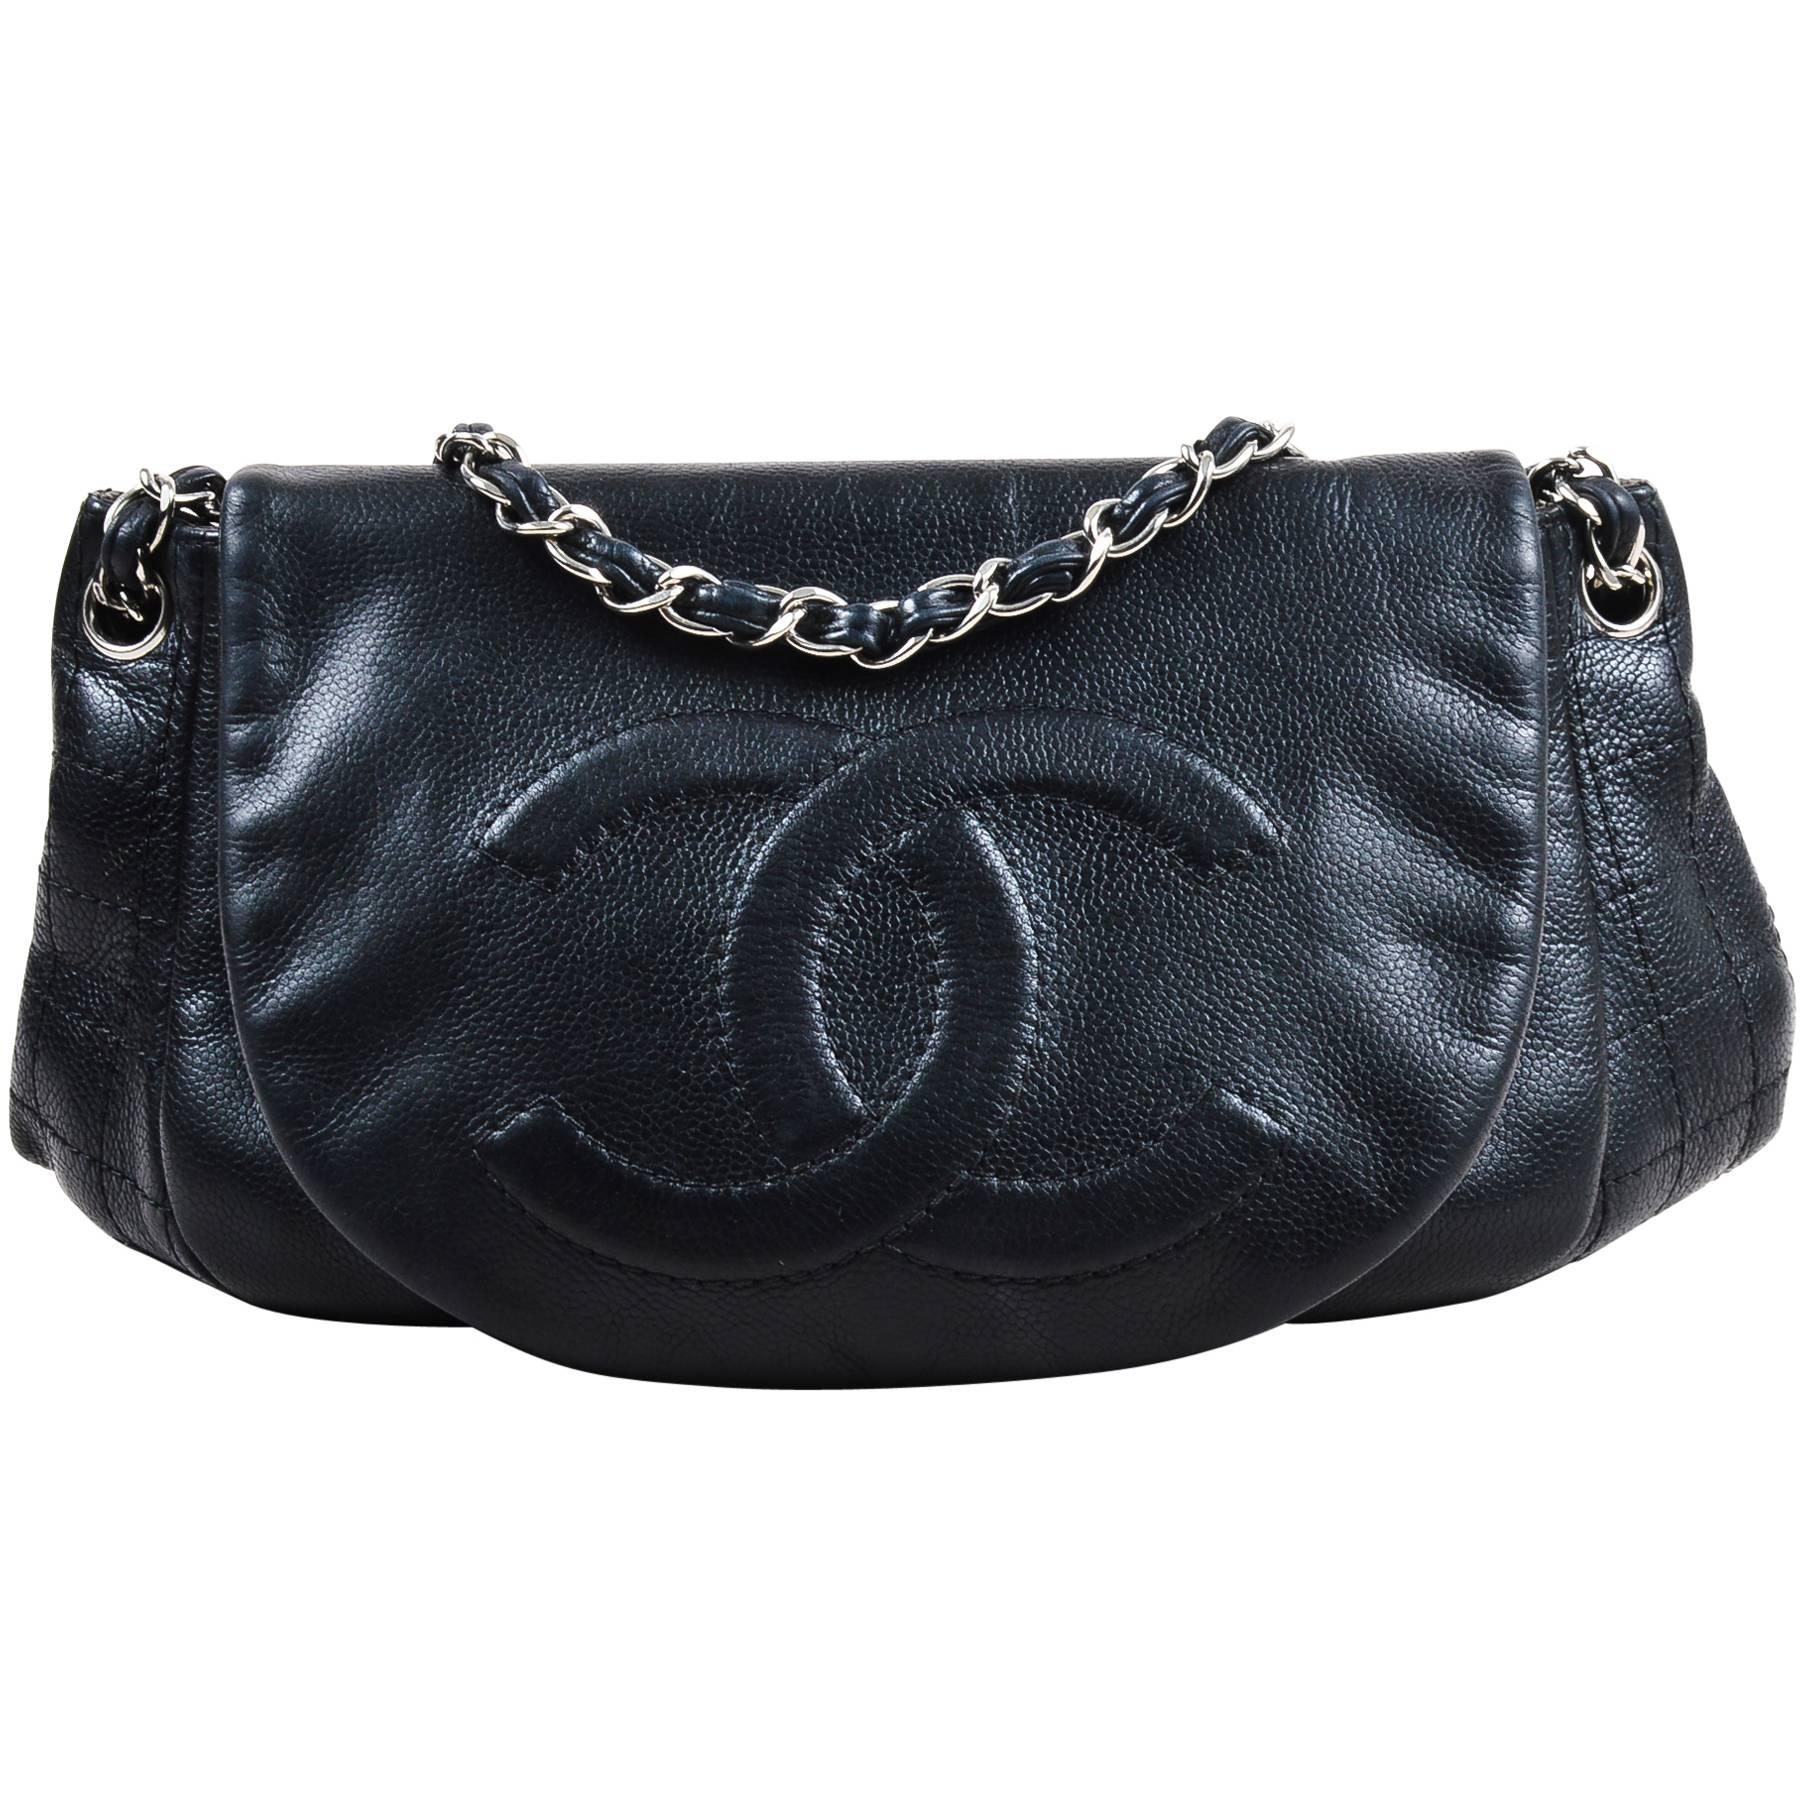 Chanel Black Caviar Leather Interwoven Chain Quilted "Half Moon" Flap Bag For Sale